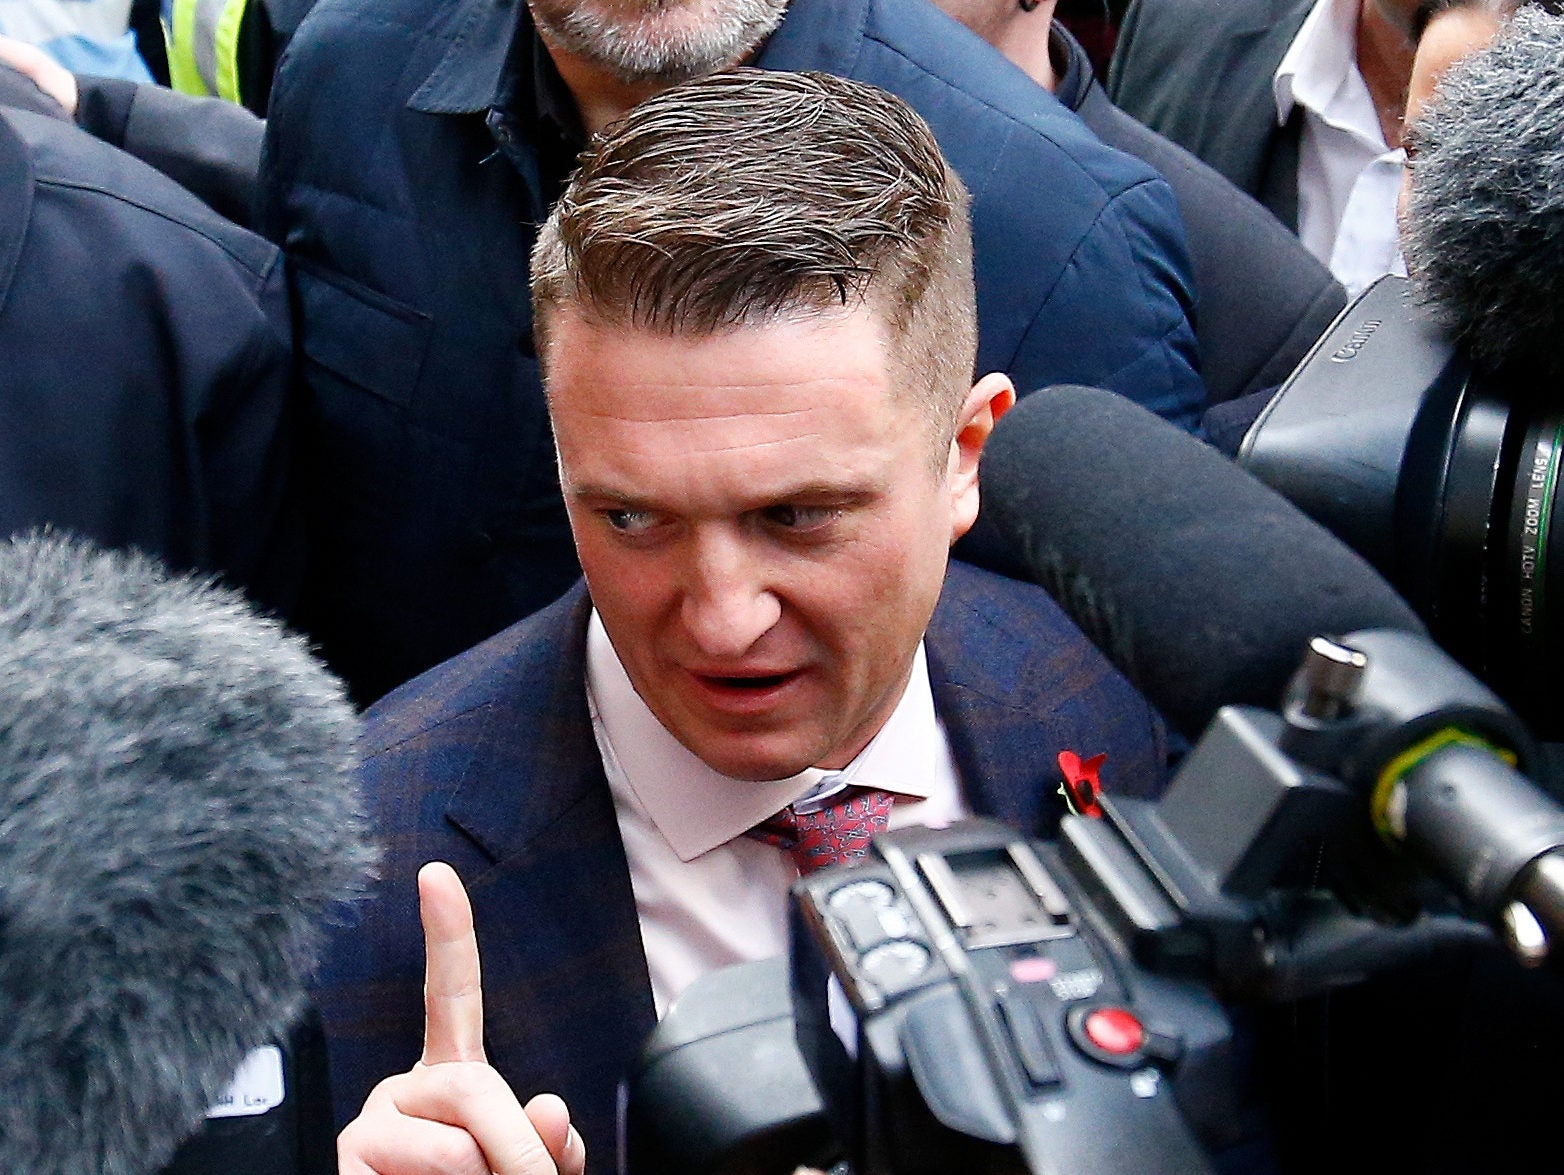 News diary 13-19 May: Sweden considers Julian Assange sex assault claims and Tommy Robinson back in court